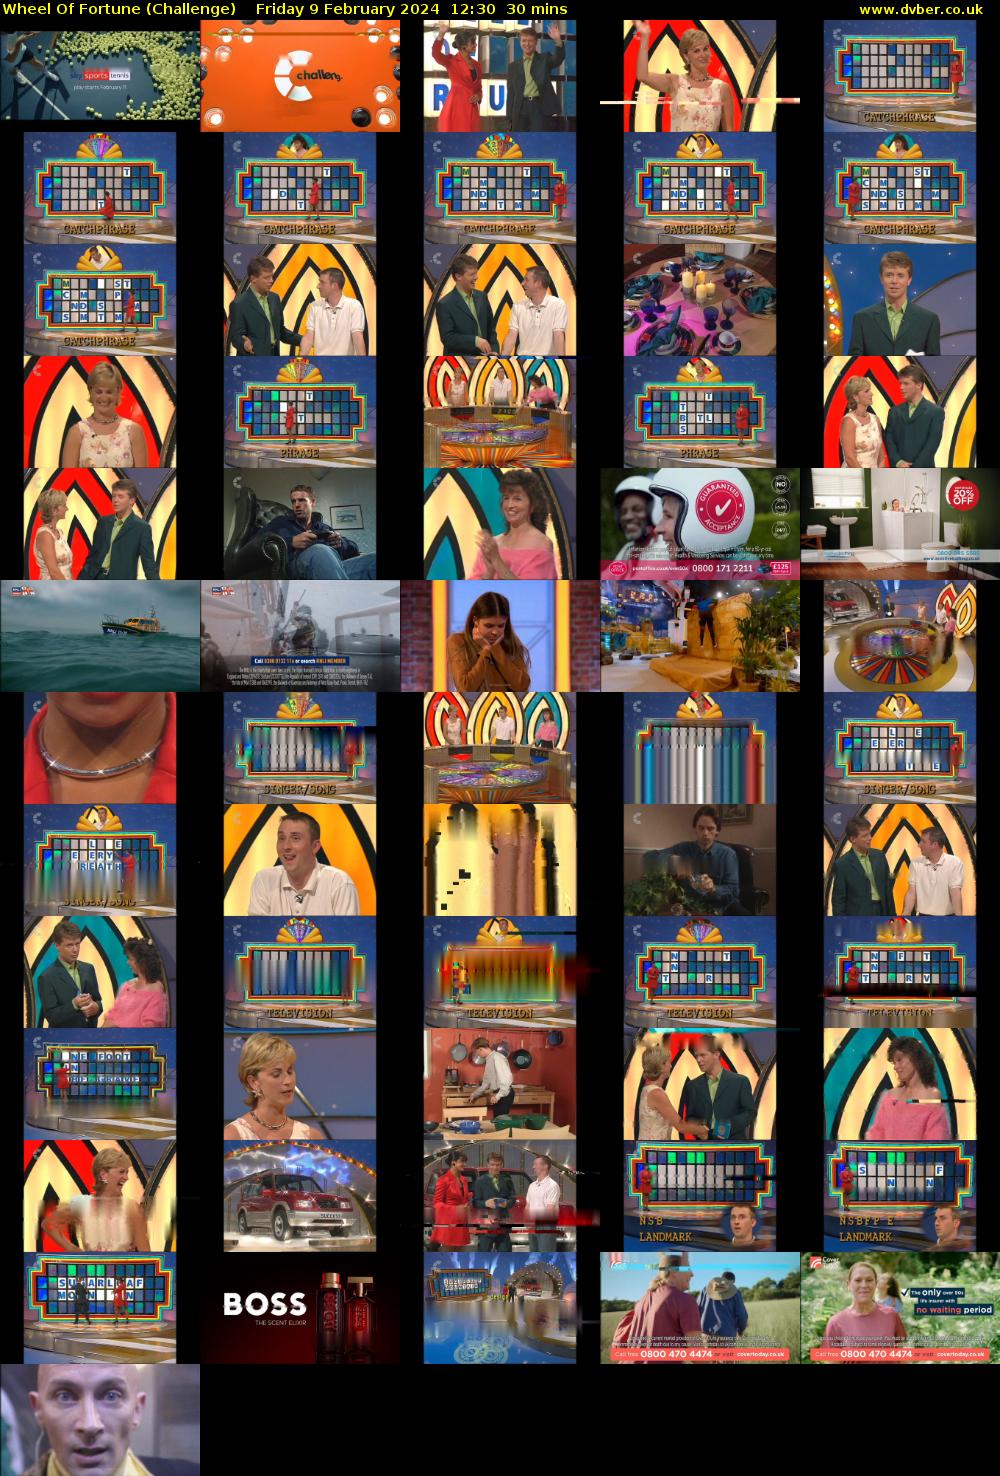 Wheel Of Fortune (Challenge) Friday 9 February 2024 12:30 - 13:00